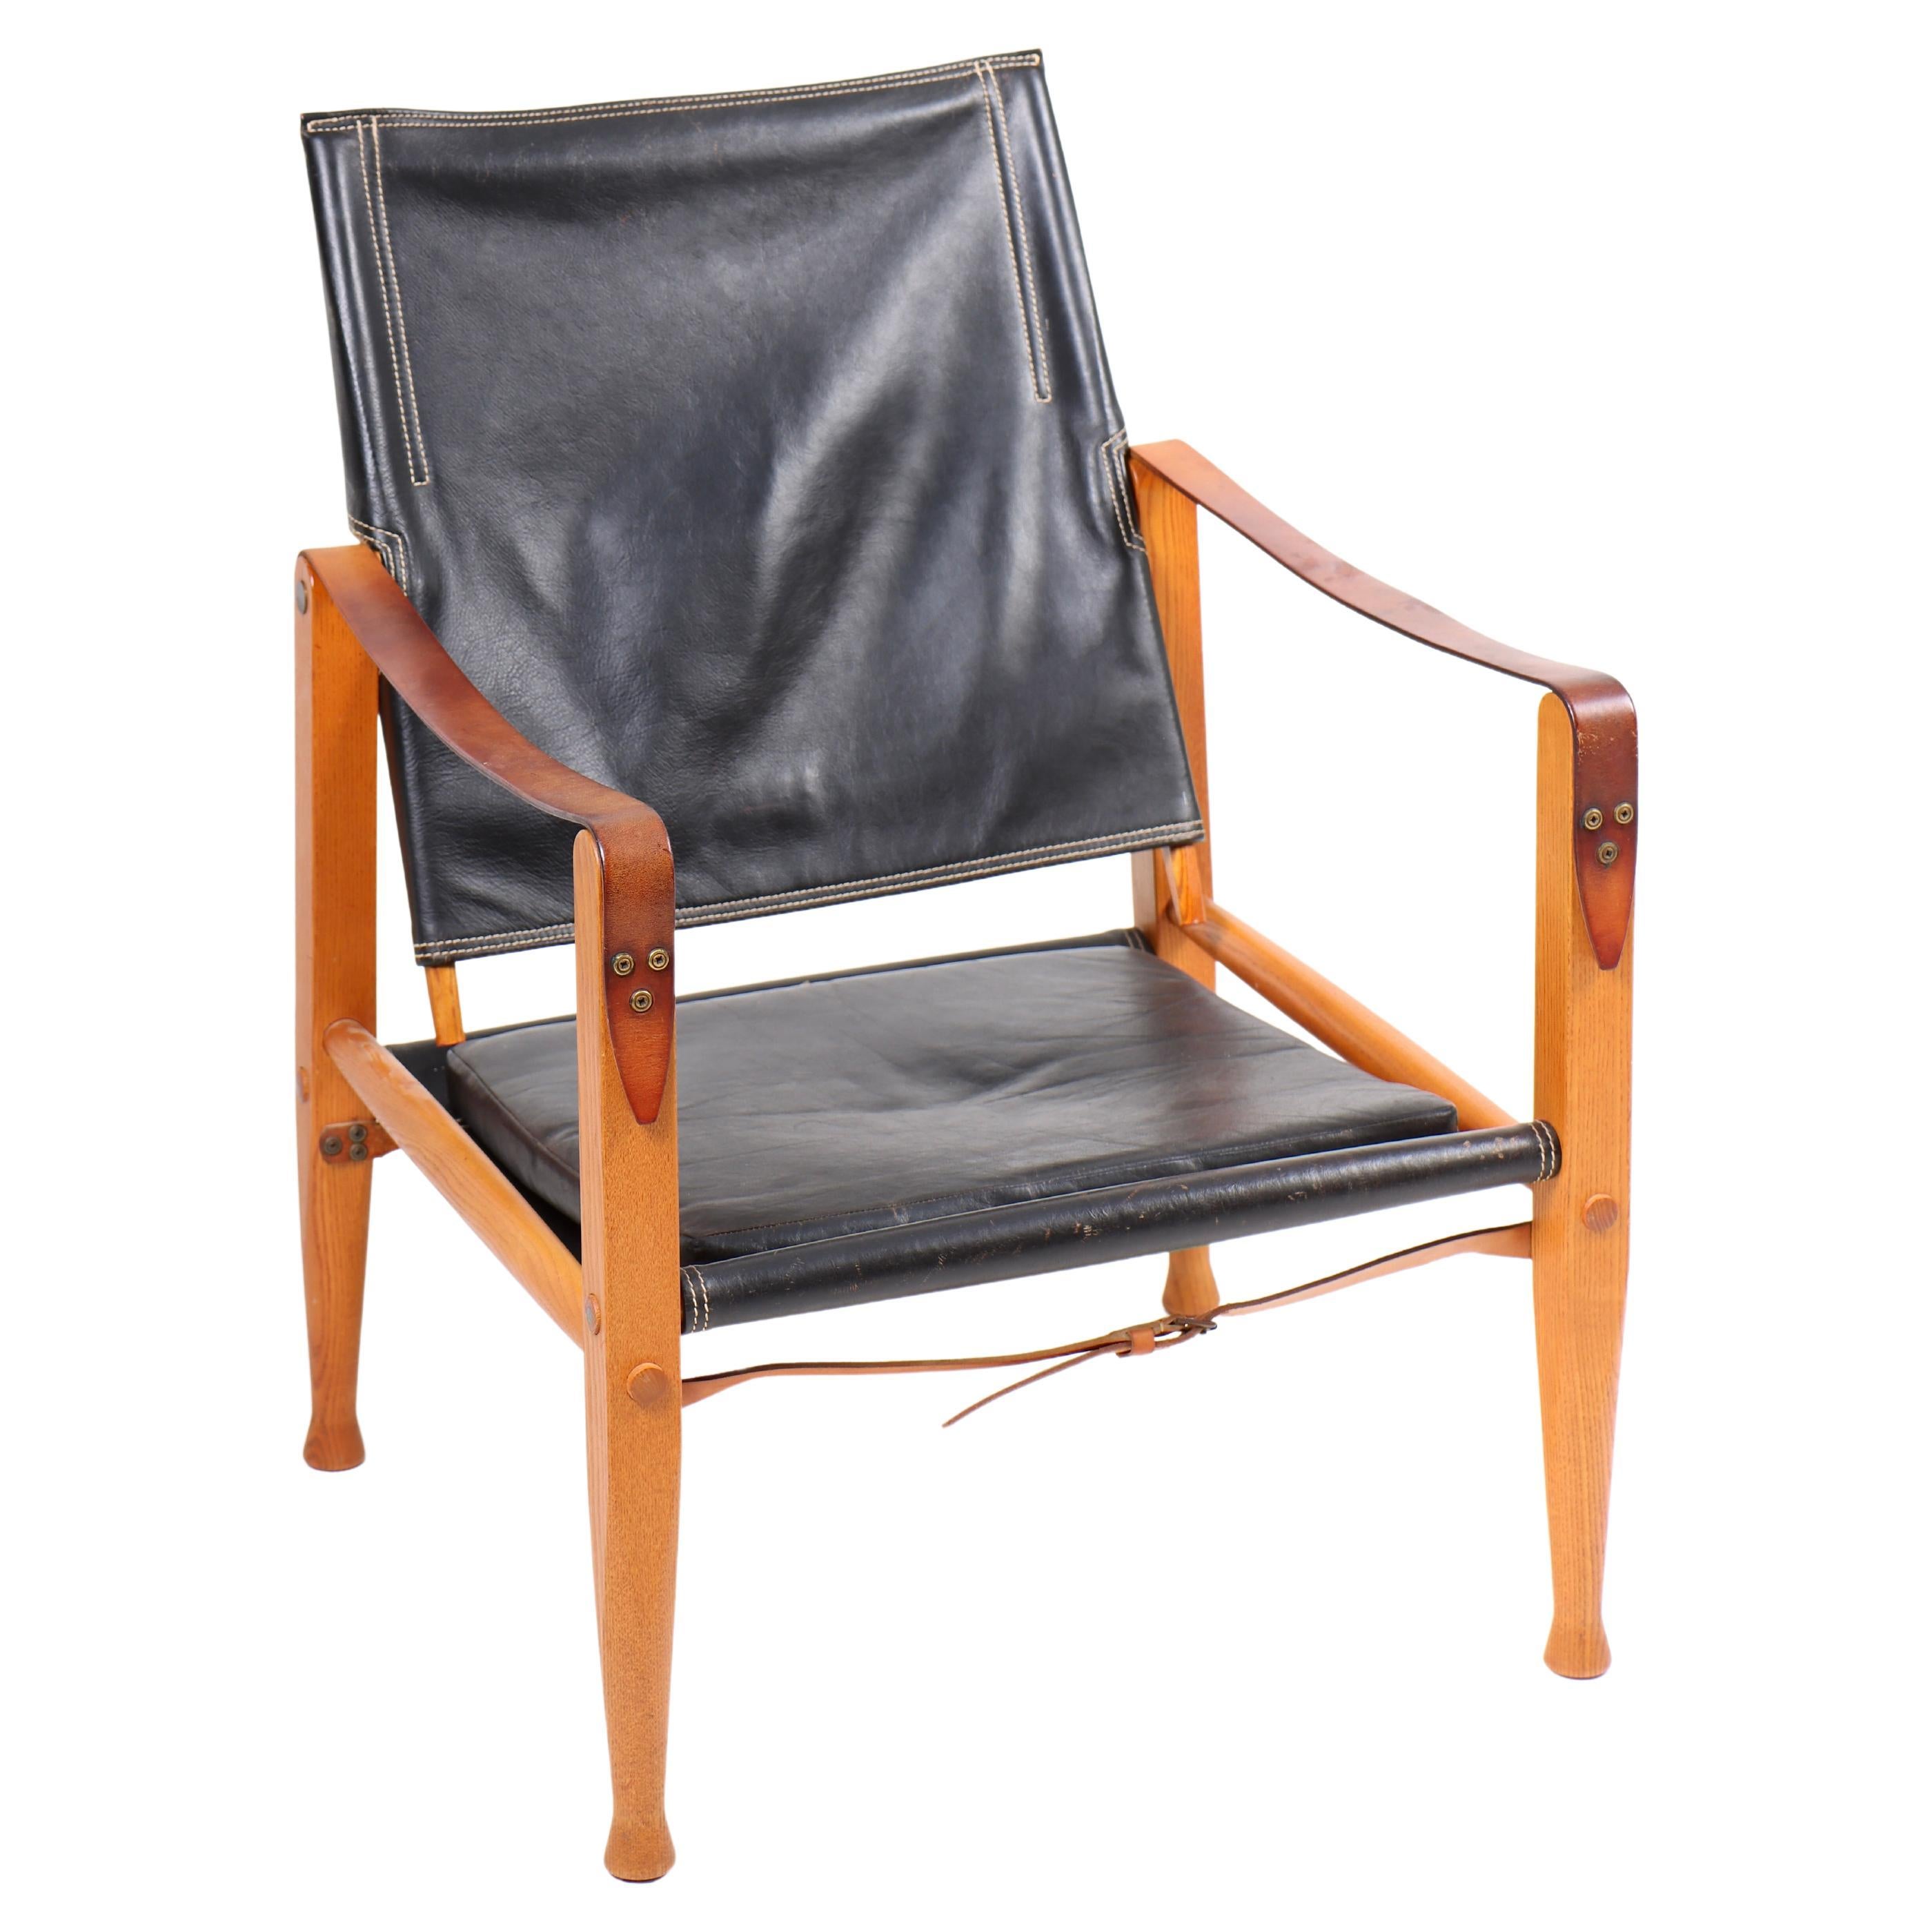 Midcentury Danish Design Lounge Chair in Patianted Leather by Klint